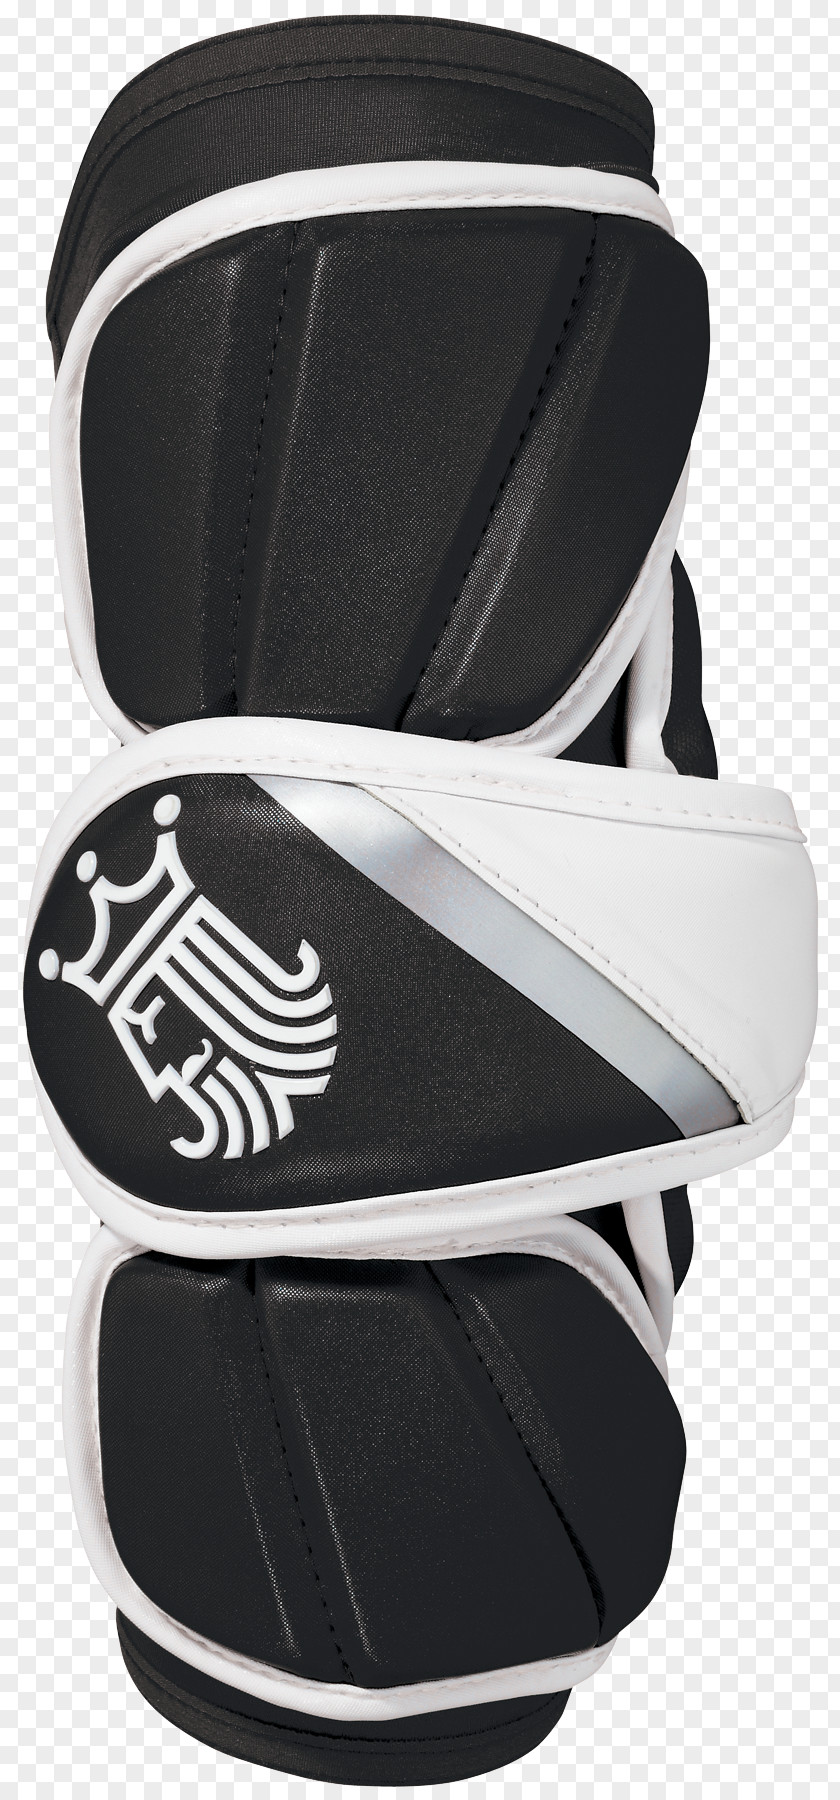 Lacrosse Protective Gear In Sports Glove Elbow Pad PNG